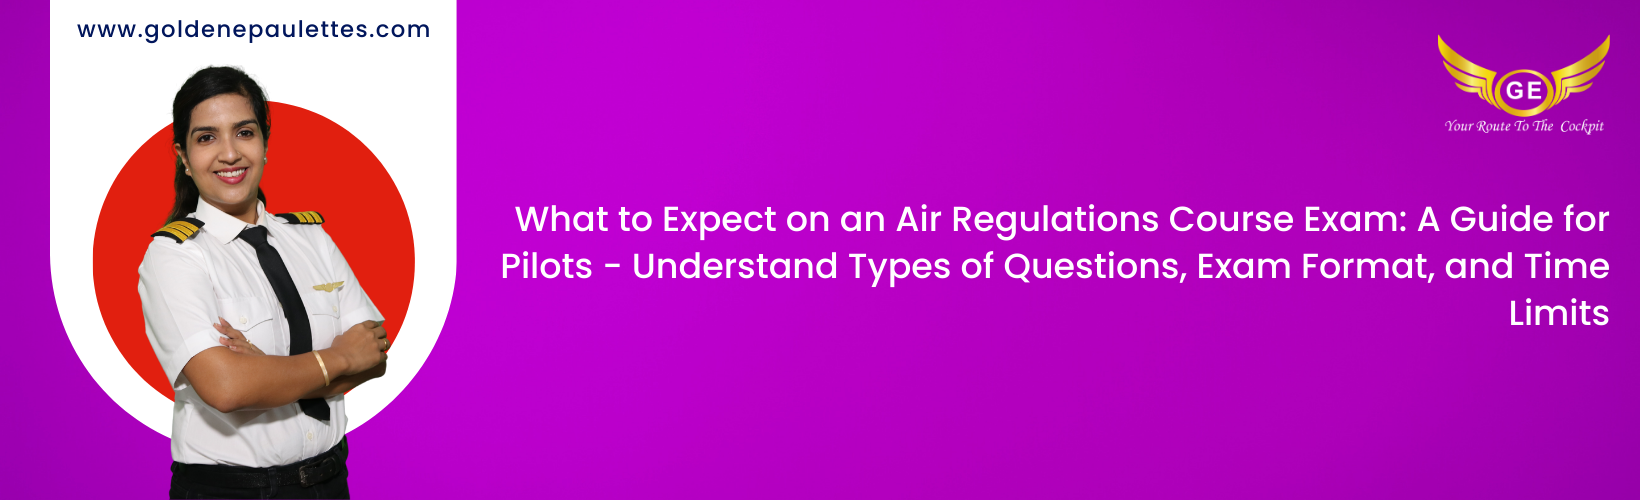 How to Get the Most out of an Air Regulations Course